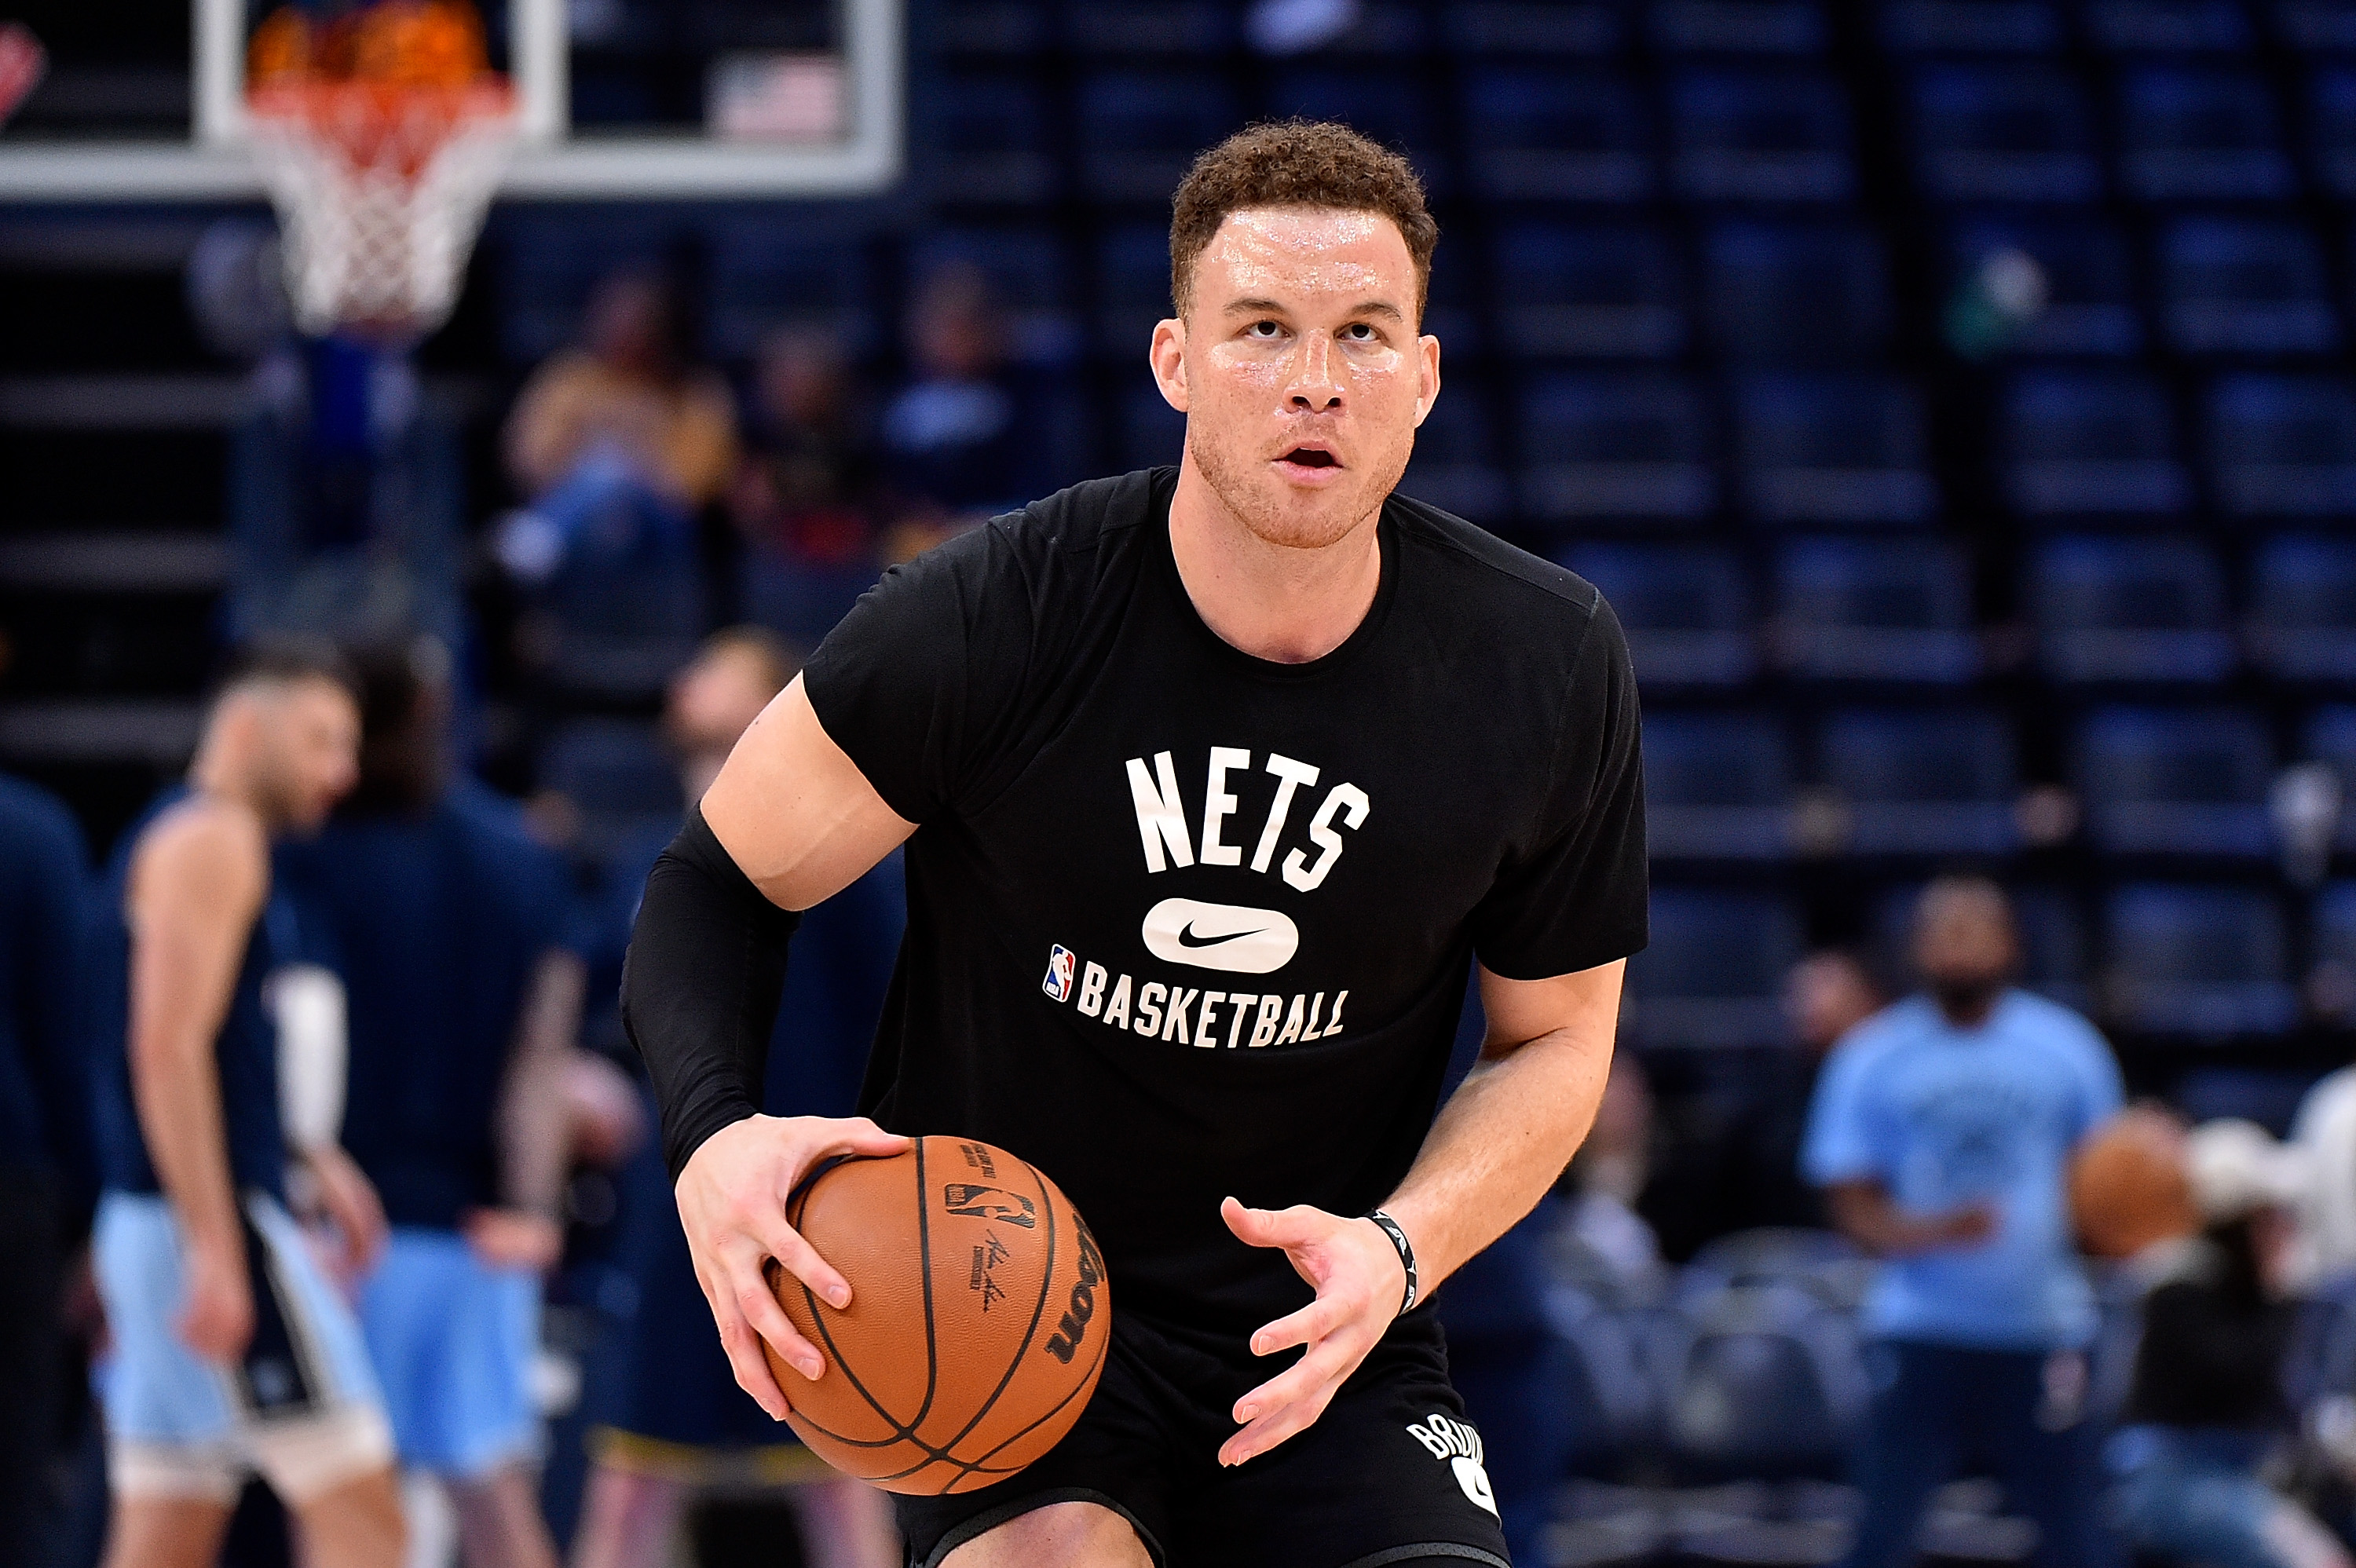 Blake Griffin of the Brooklyn Nets warms up before a game.